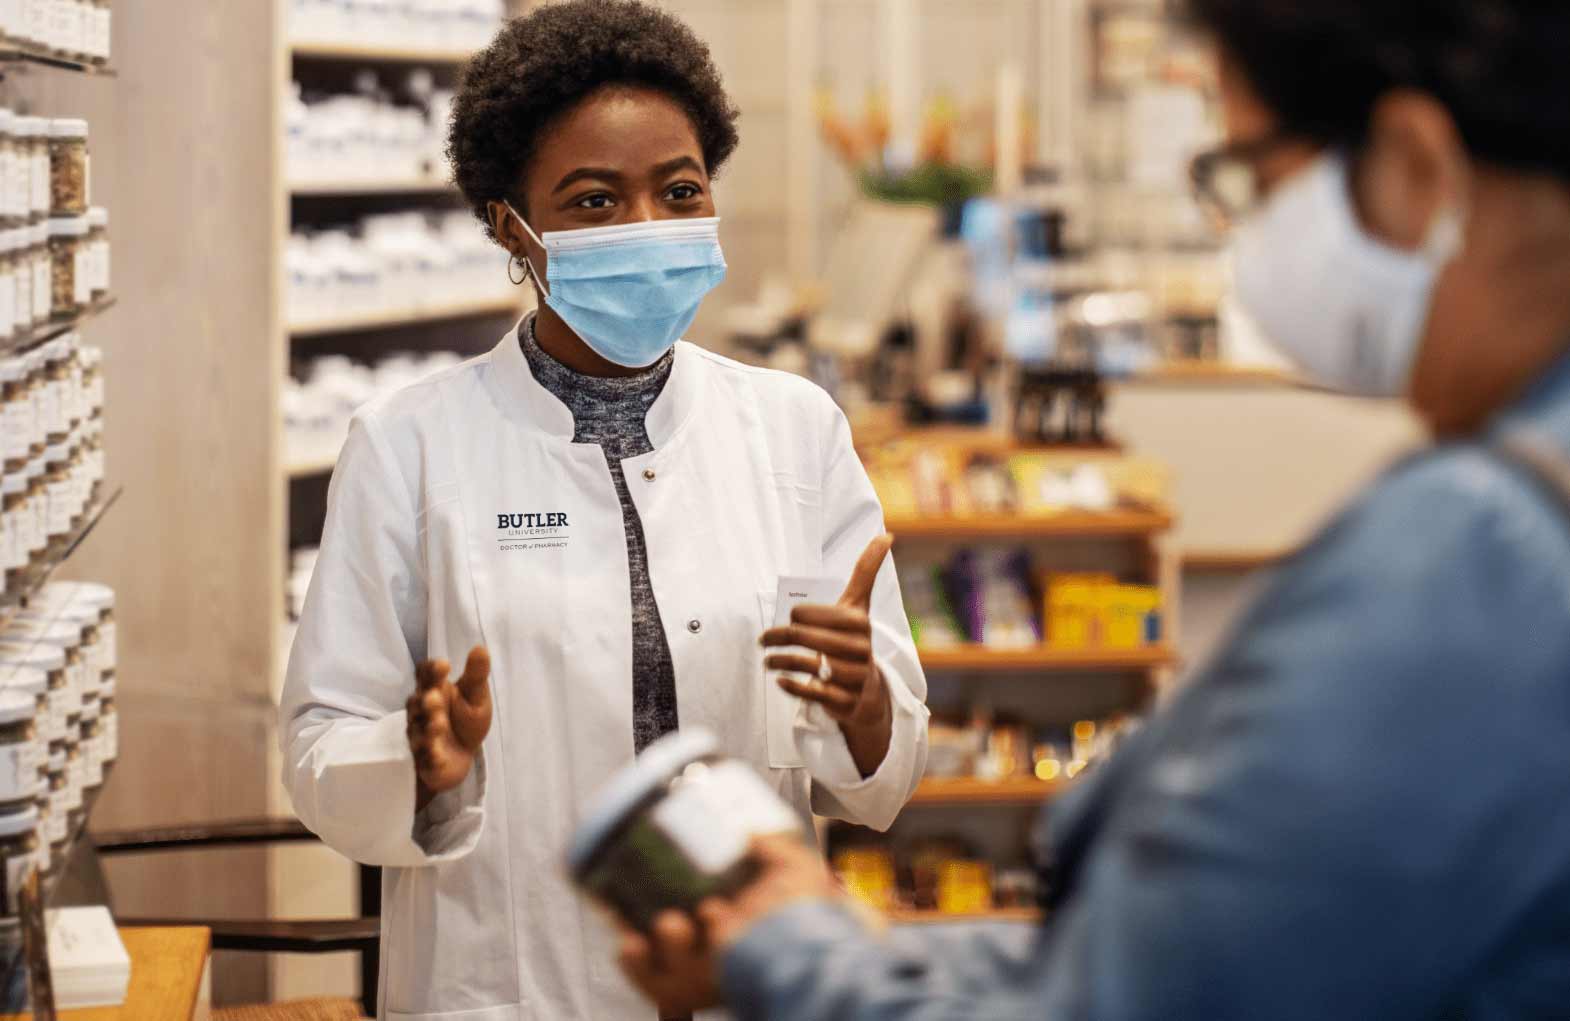 Butler student in mask assisting a customer at the pharmacy